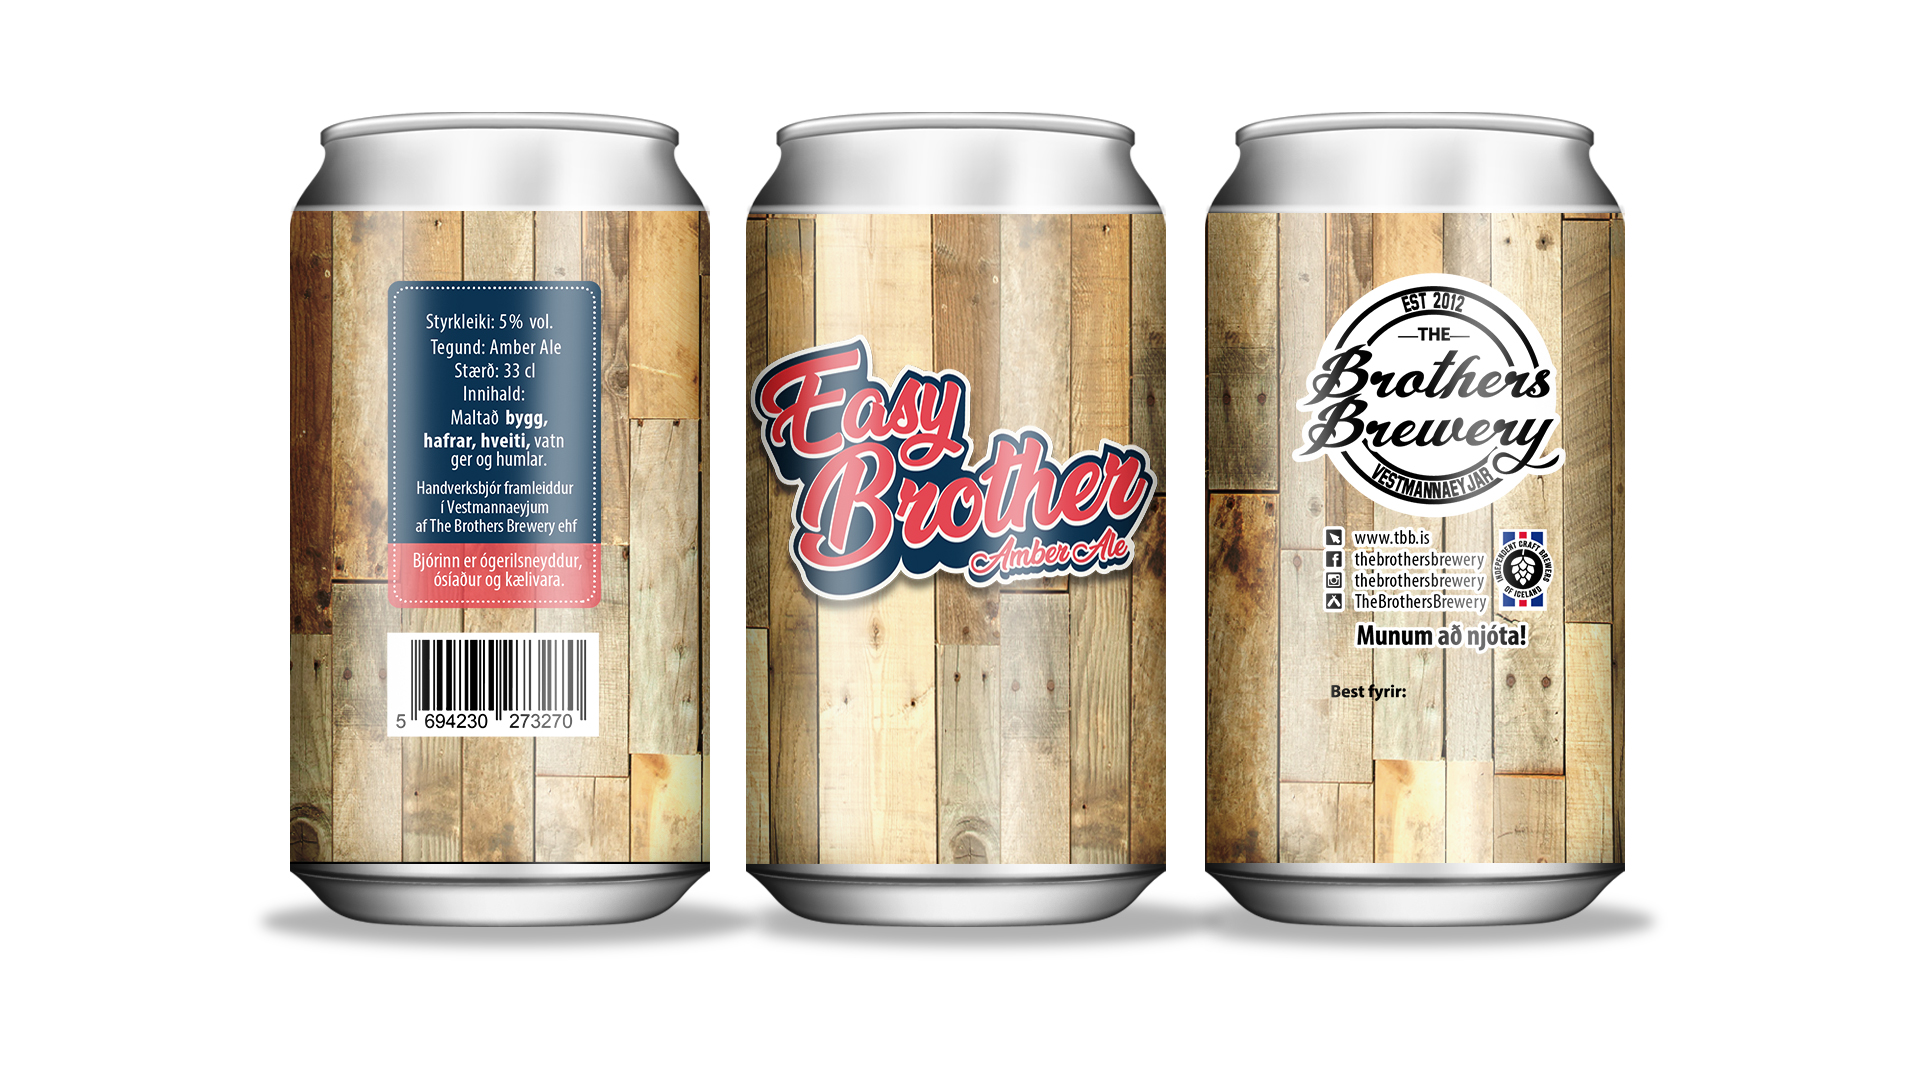 https://tbb.is/wp-content/uploads/2022/01/easy_brothers_cans_mockup.jpg